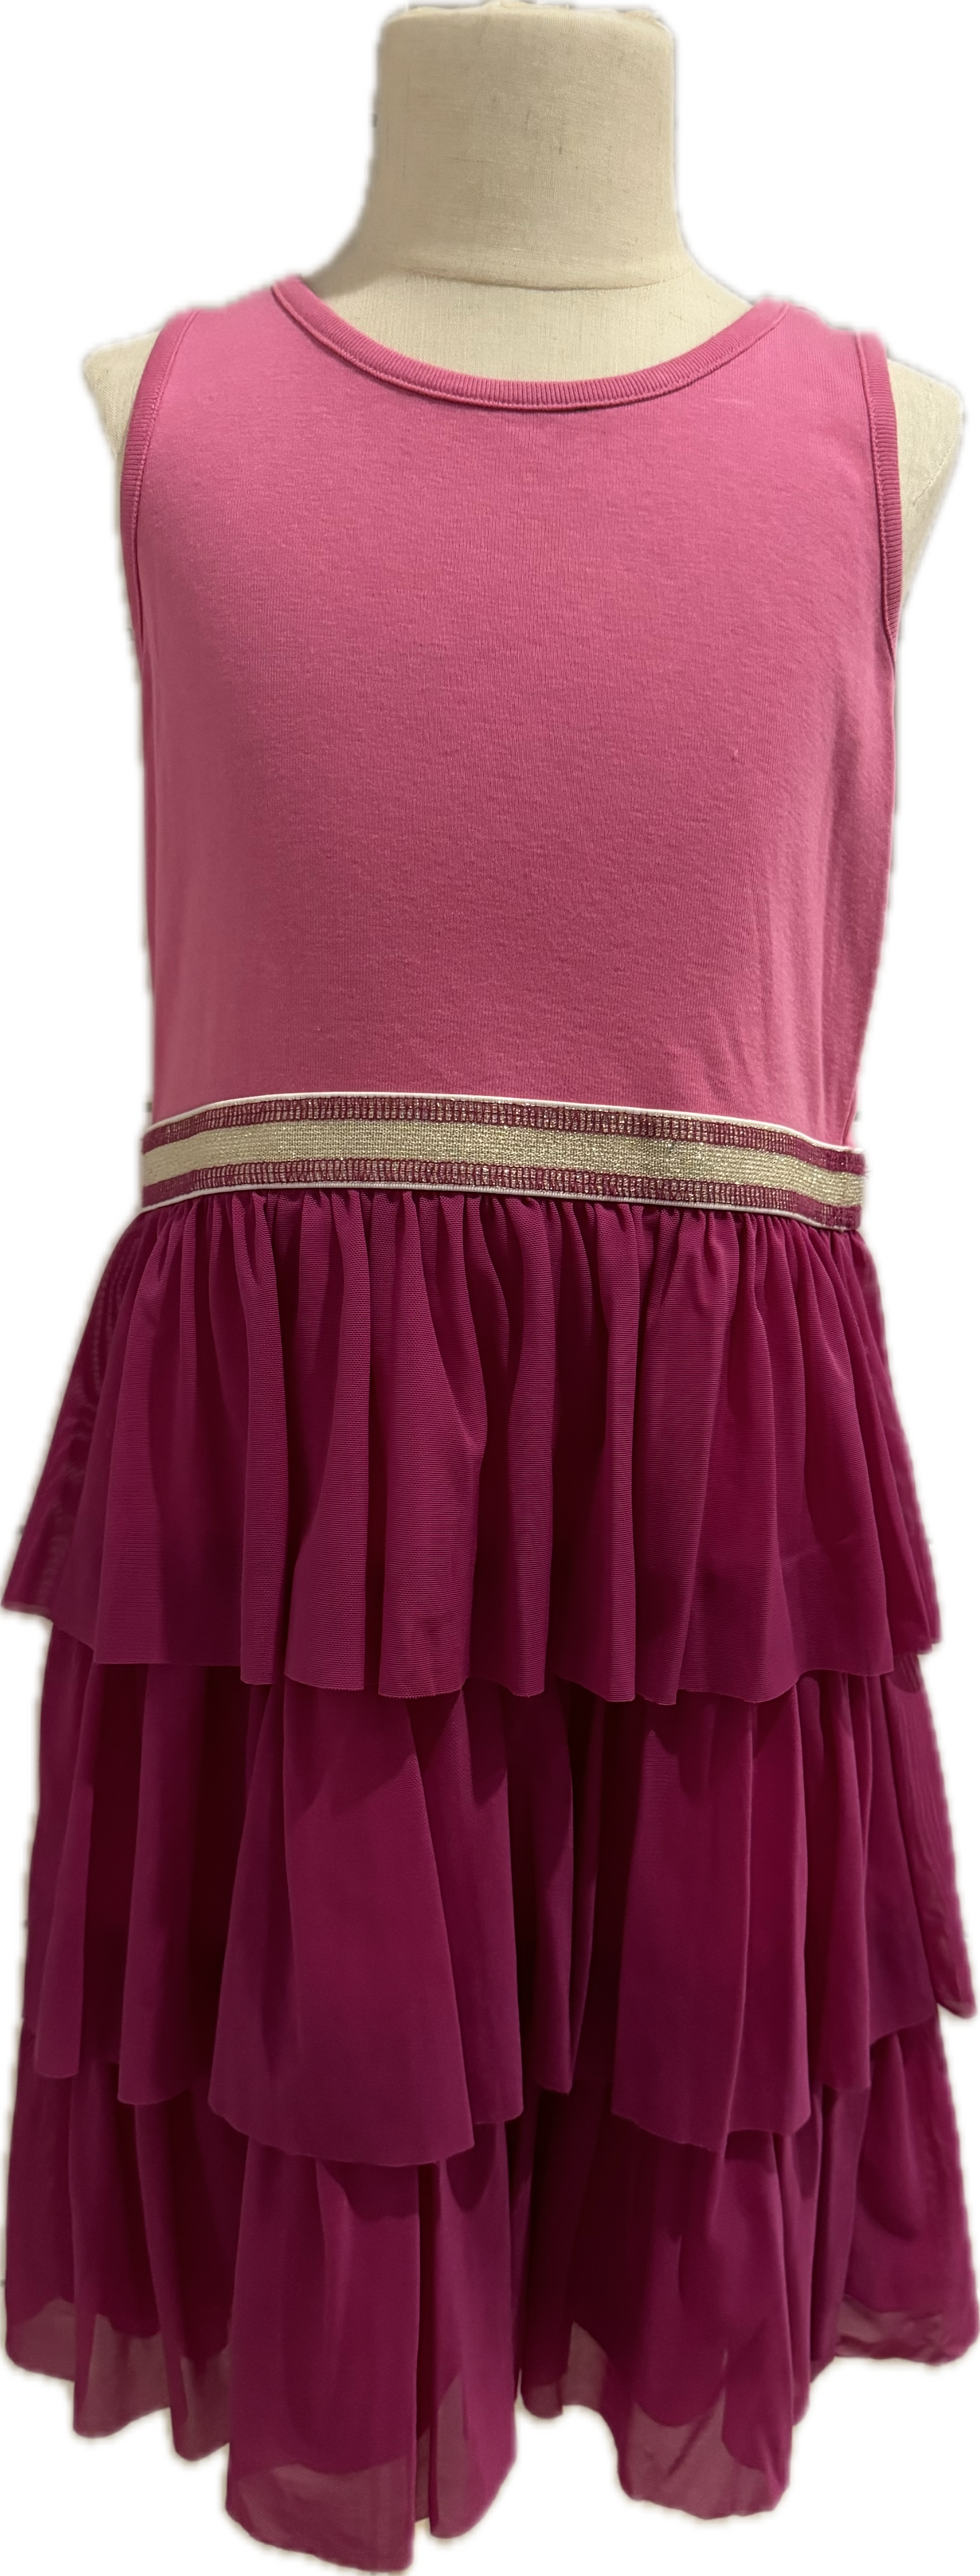 Hanna Andersson Tiered Dress, Pink Girls Size 130